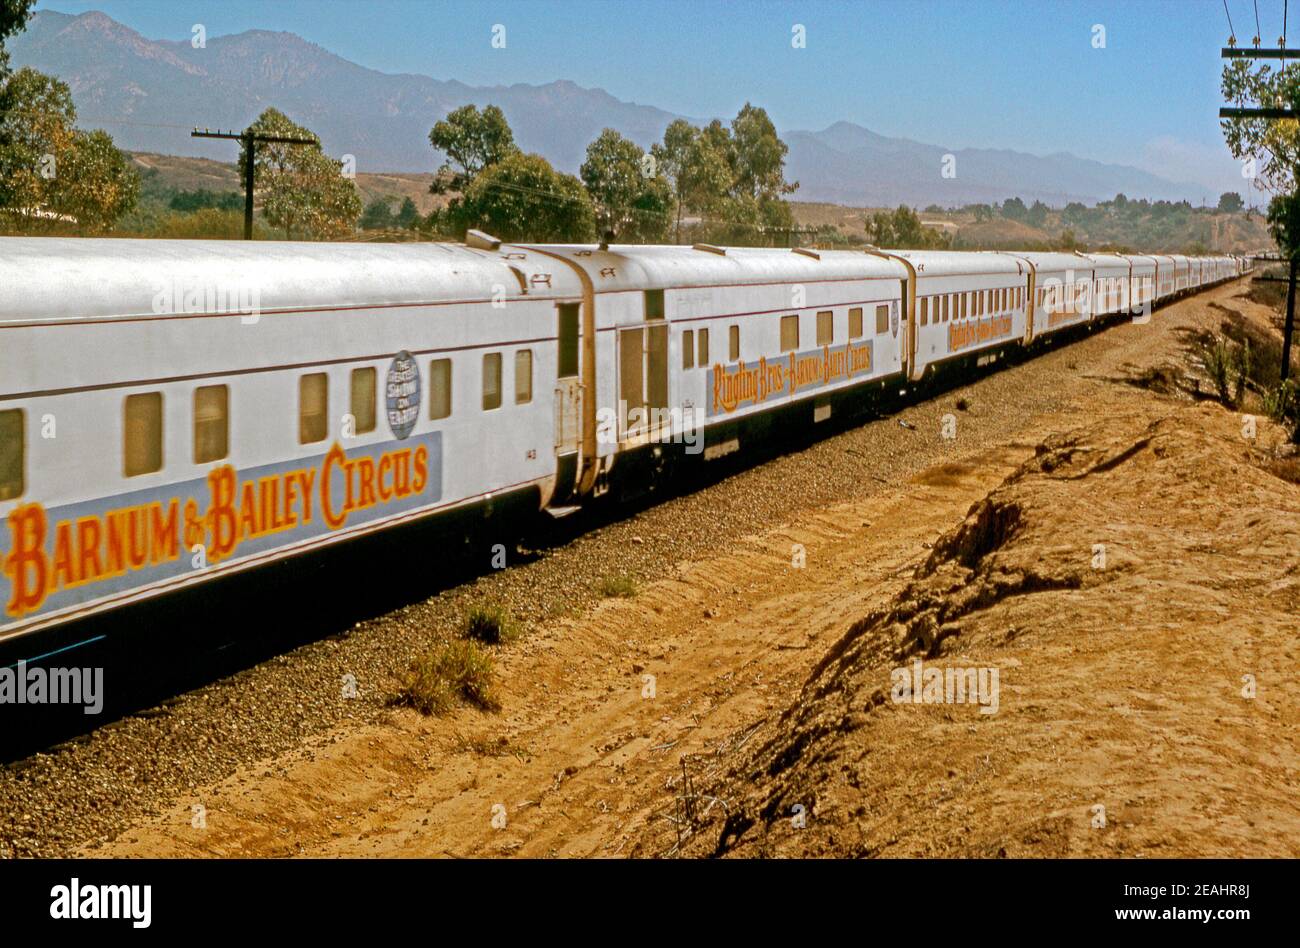 The Ringling Bros and Barnum and Bailey Circus Train in rural USA in 1972. It was called ‘The Greatest Show on Earth’. Trains were first used in 1872 and this train is pulled by two Southern Pacific GP35 diesel locomotives. The trains stretched to over a mile long. This image is from an old American amateur Kodak 35mm colour transparency. Stock Photo